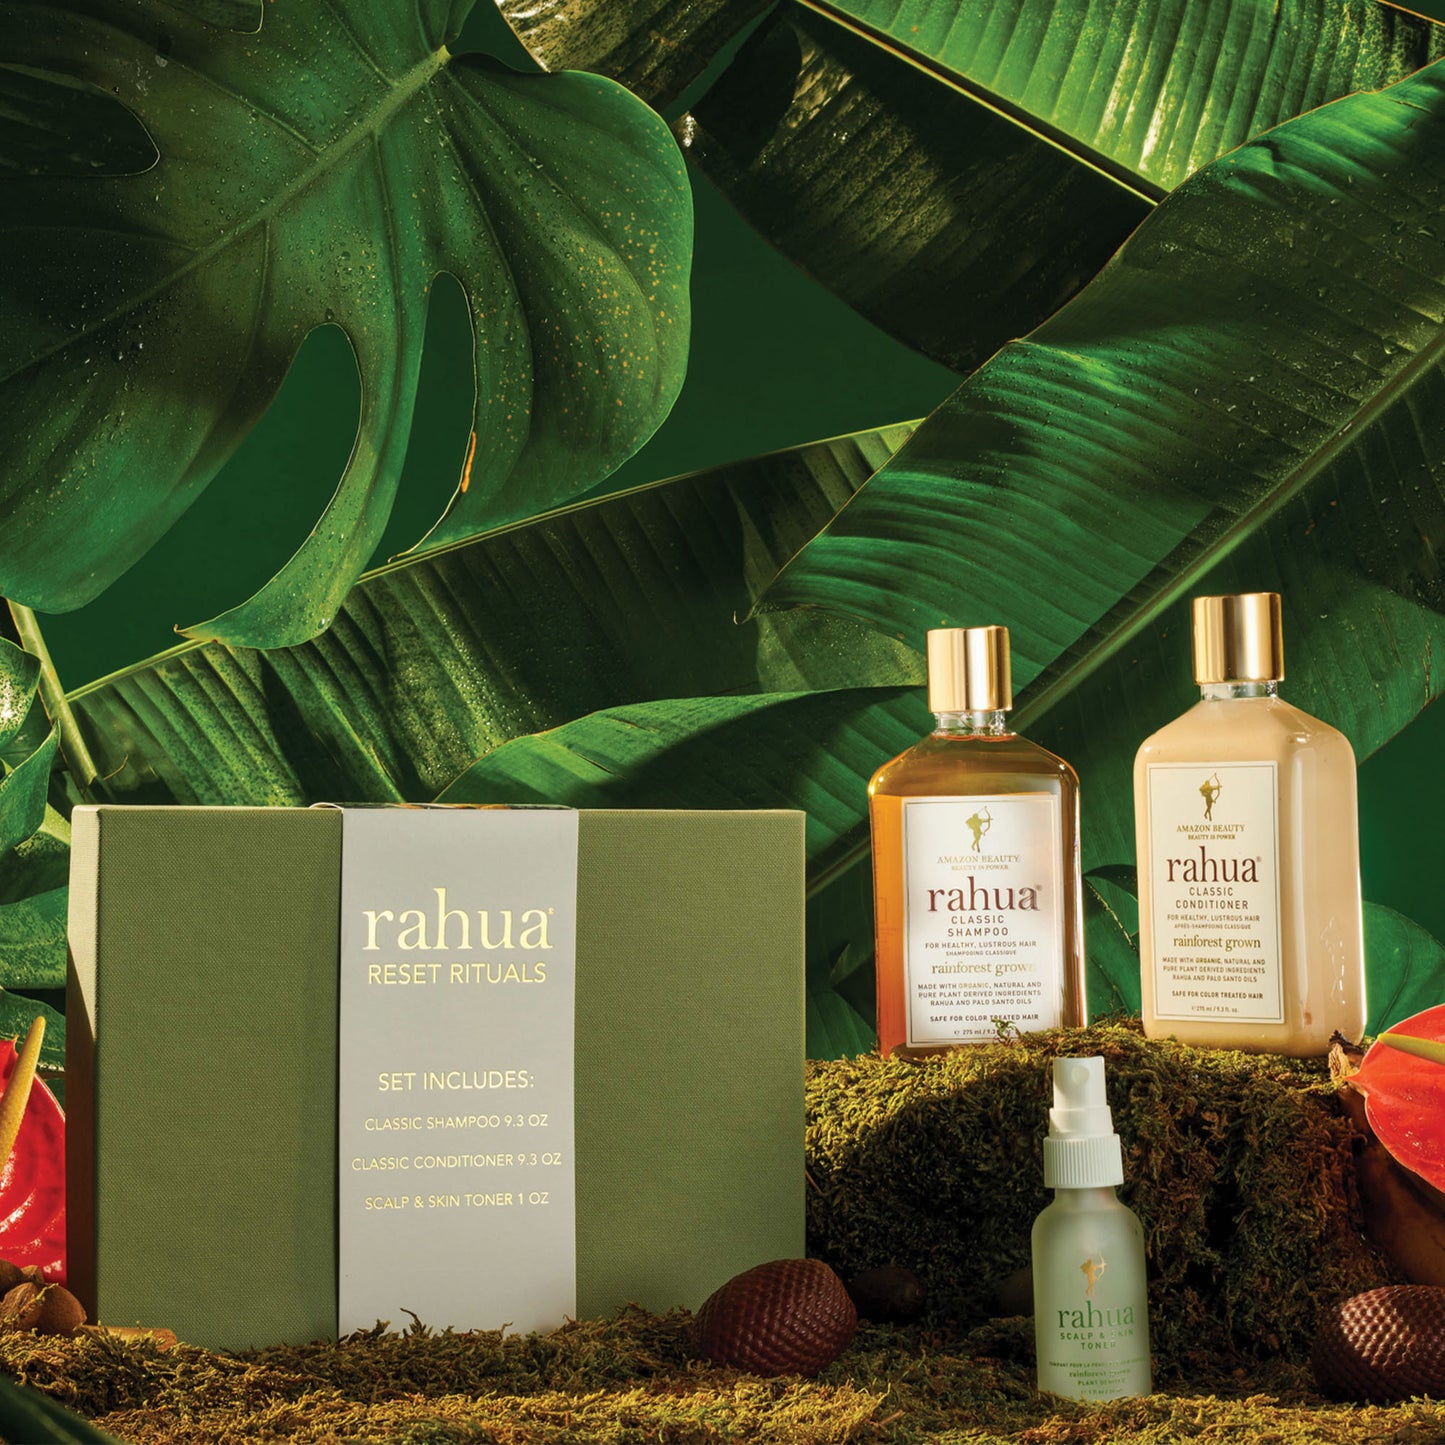 rahua reset rituals set with with leaves